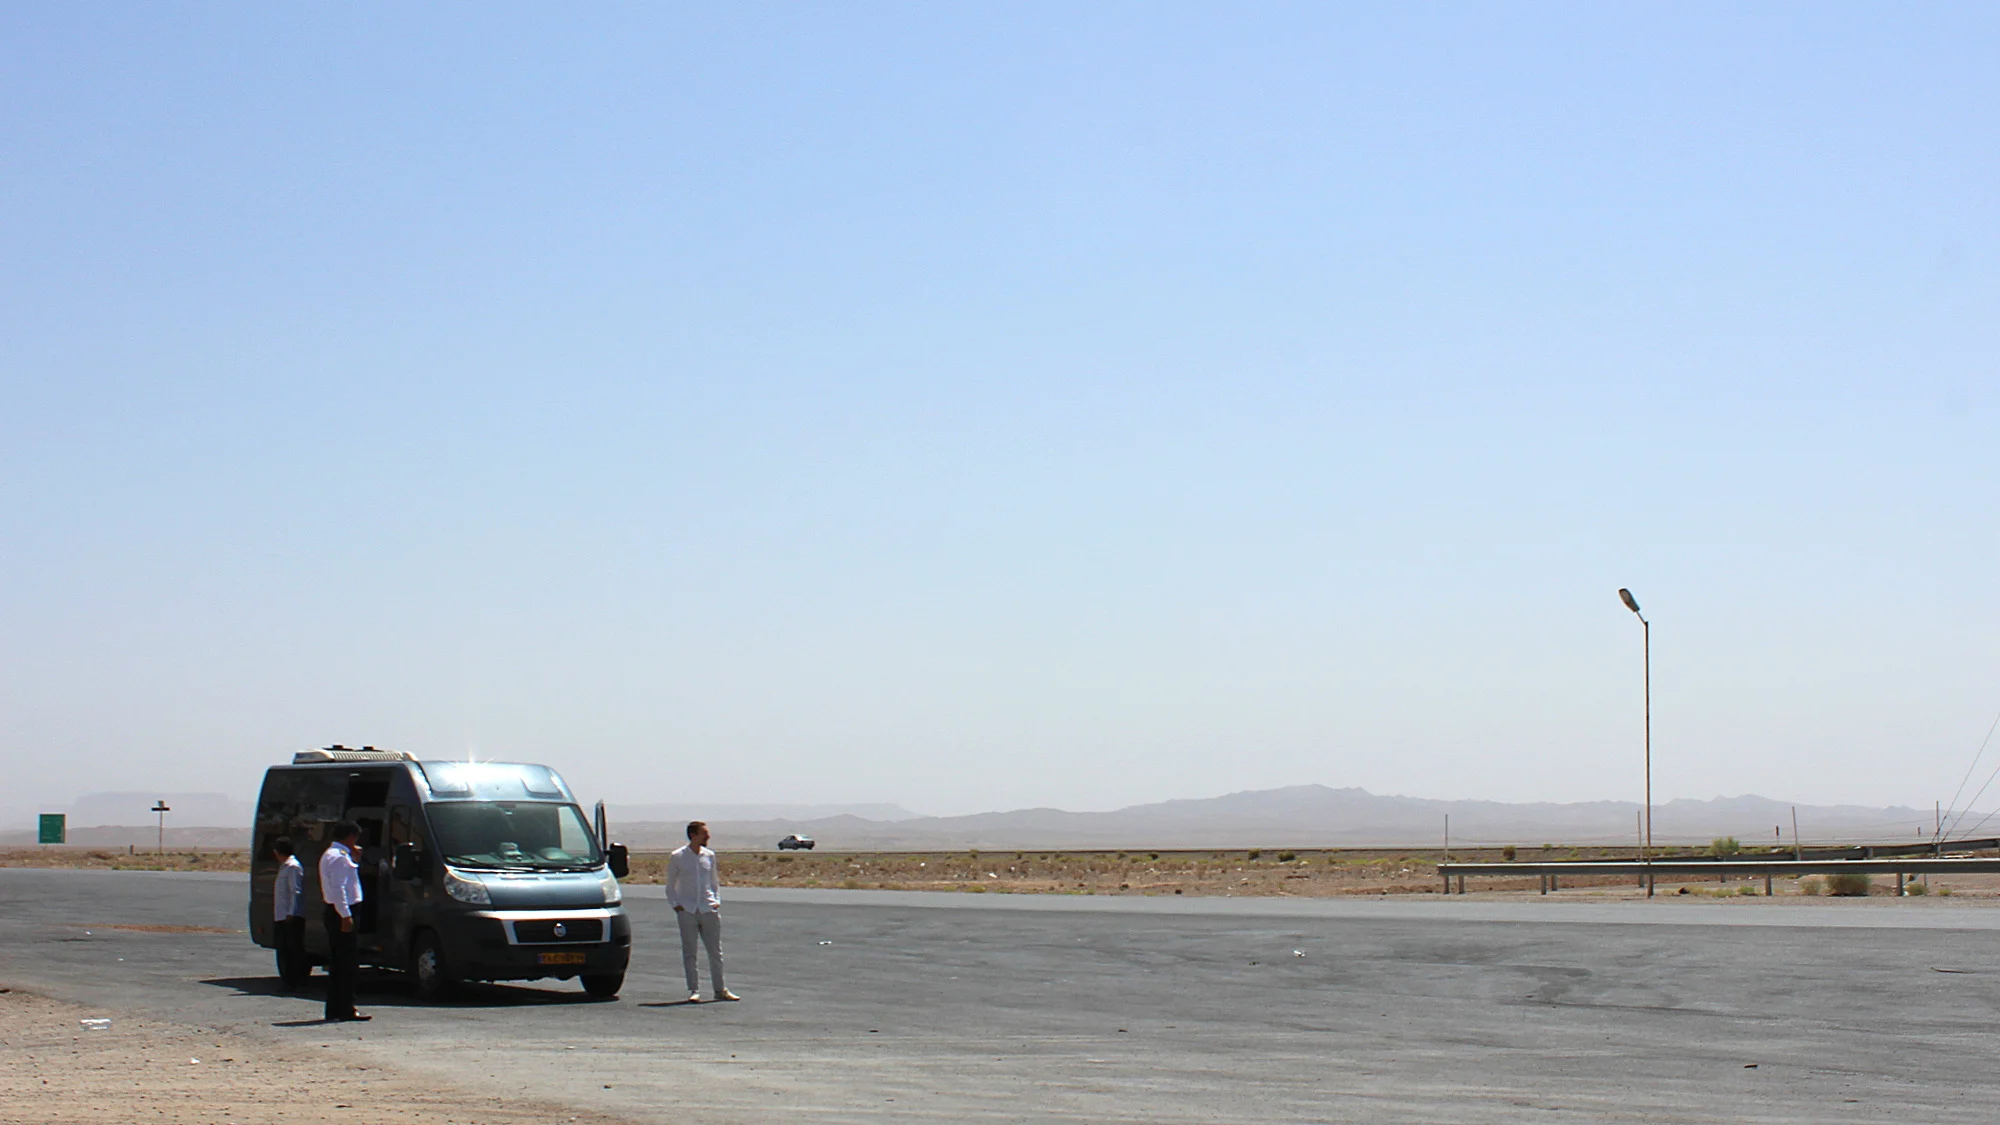 A grey minibus at the side of the road on a desert during a guided tour of Iran.